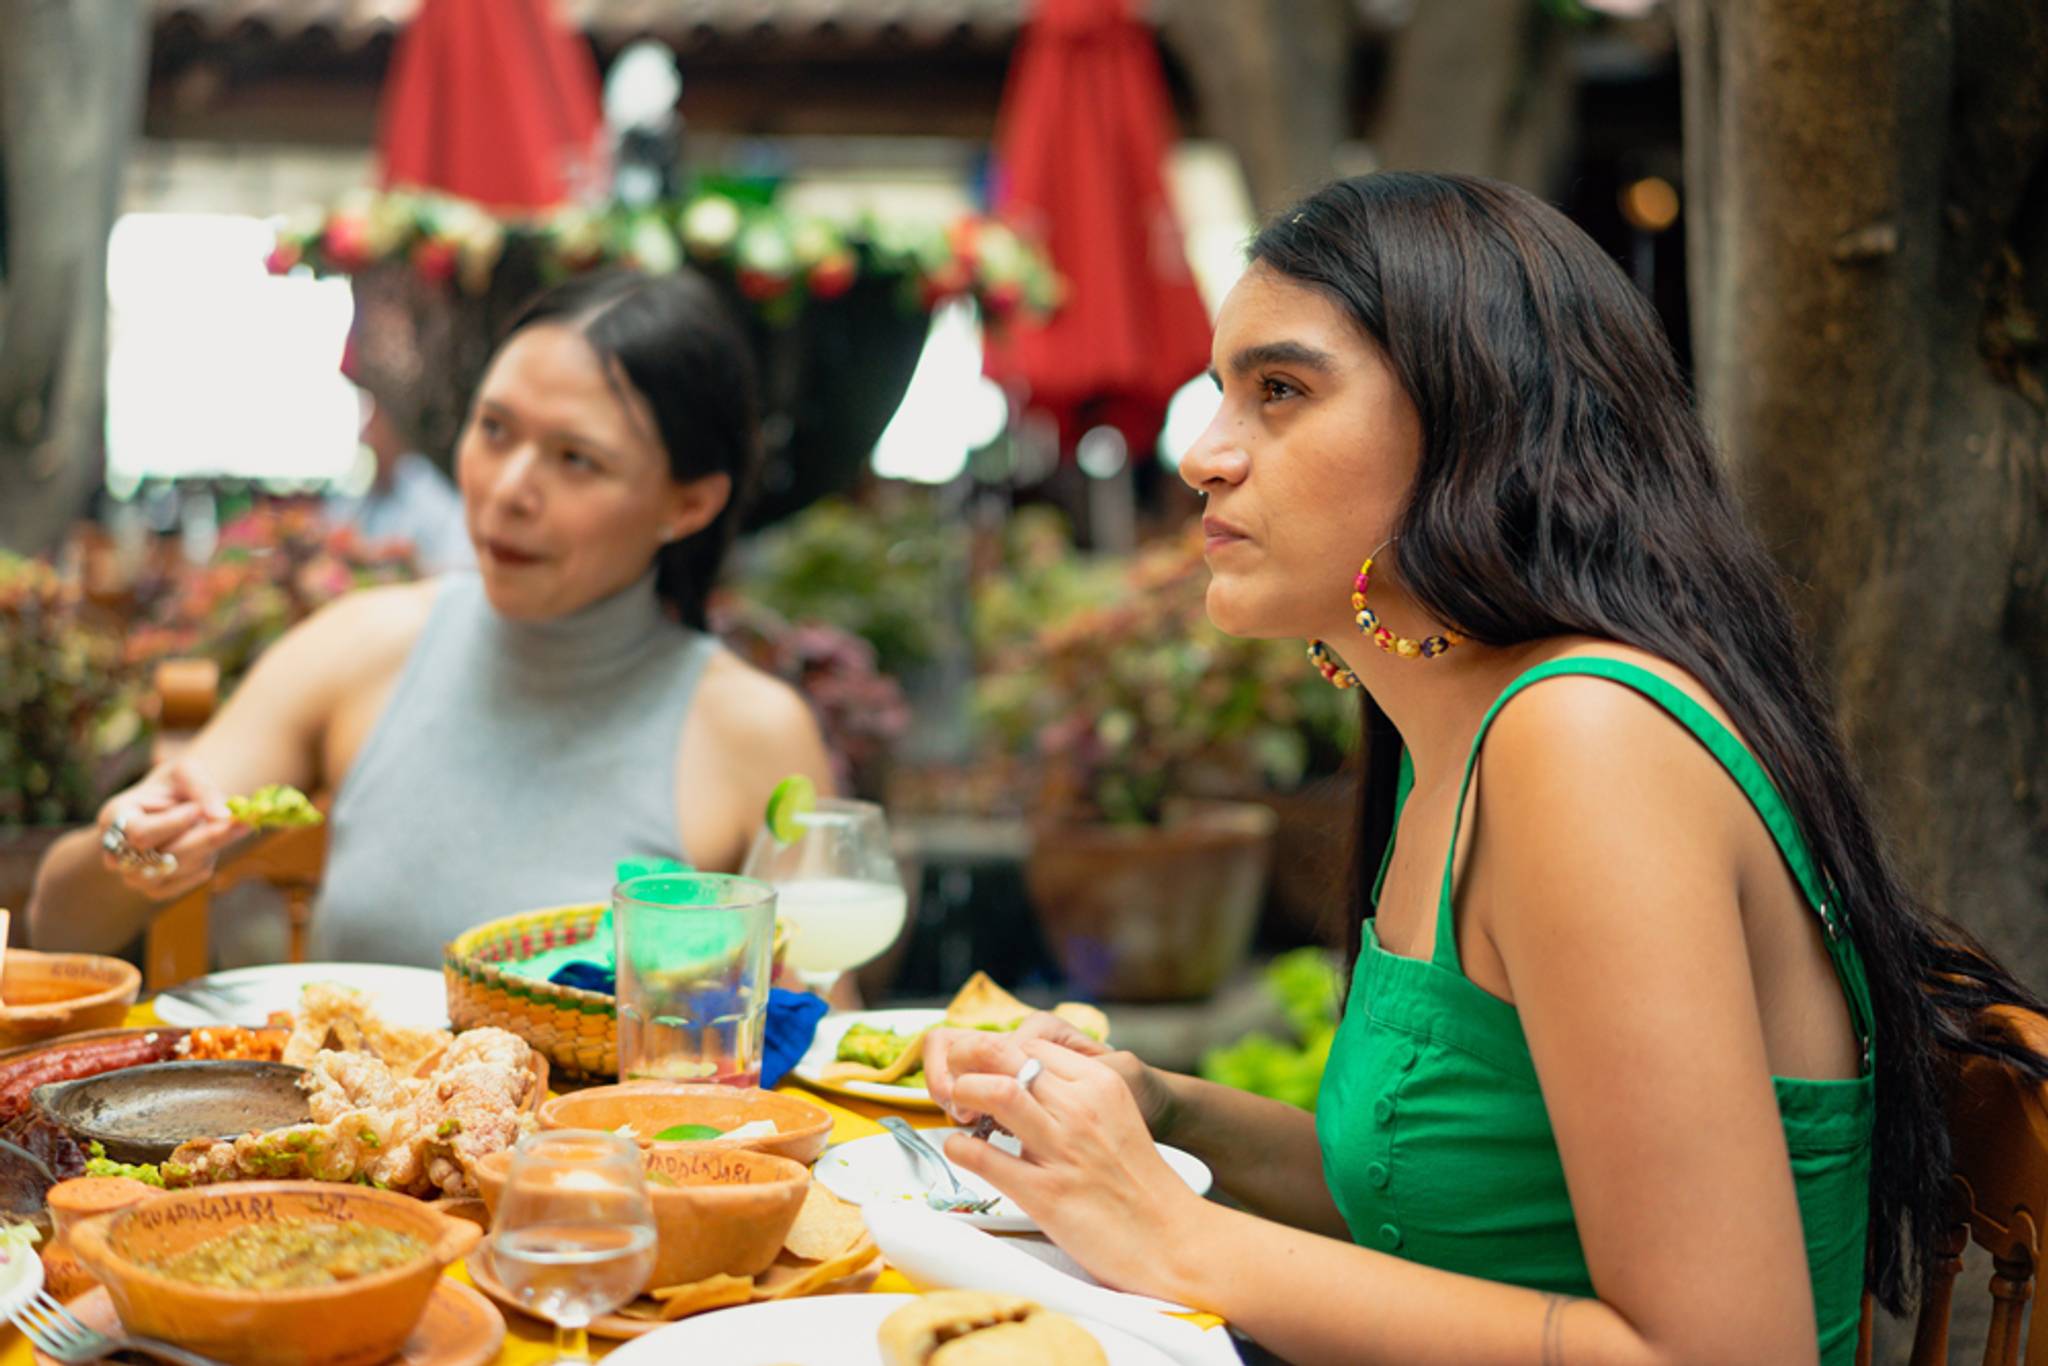 How Latinx activism impacts purchasing choices